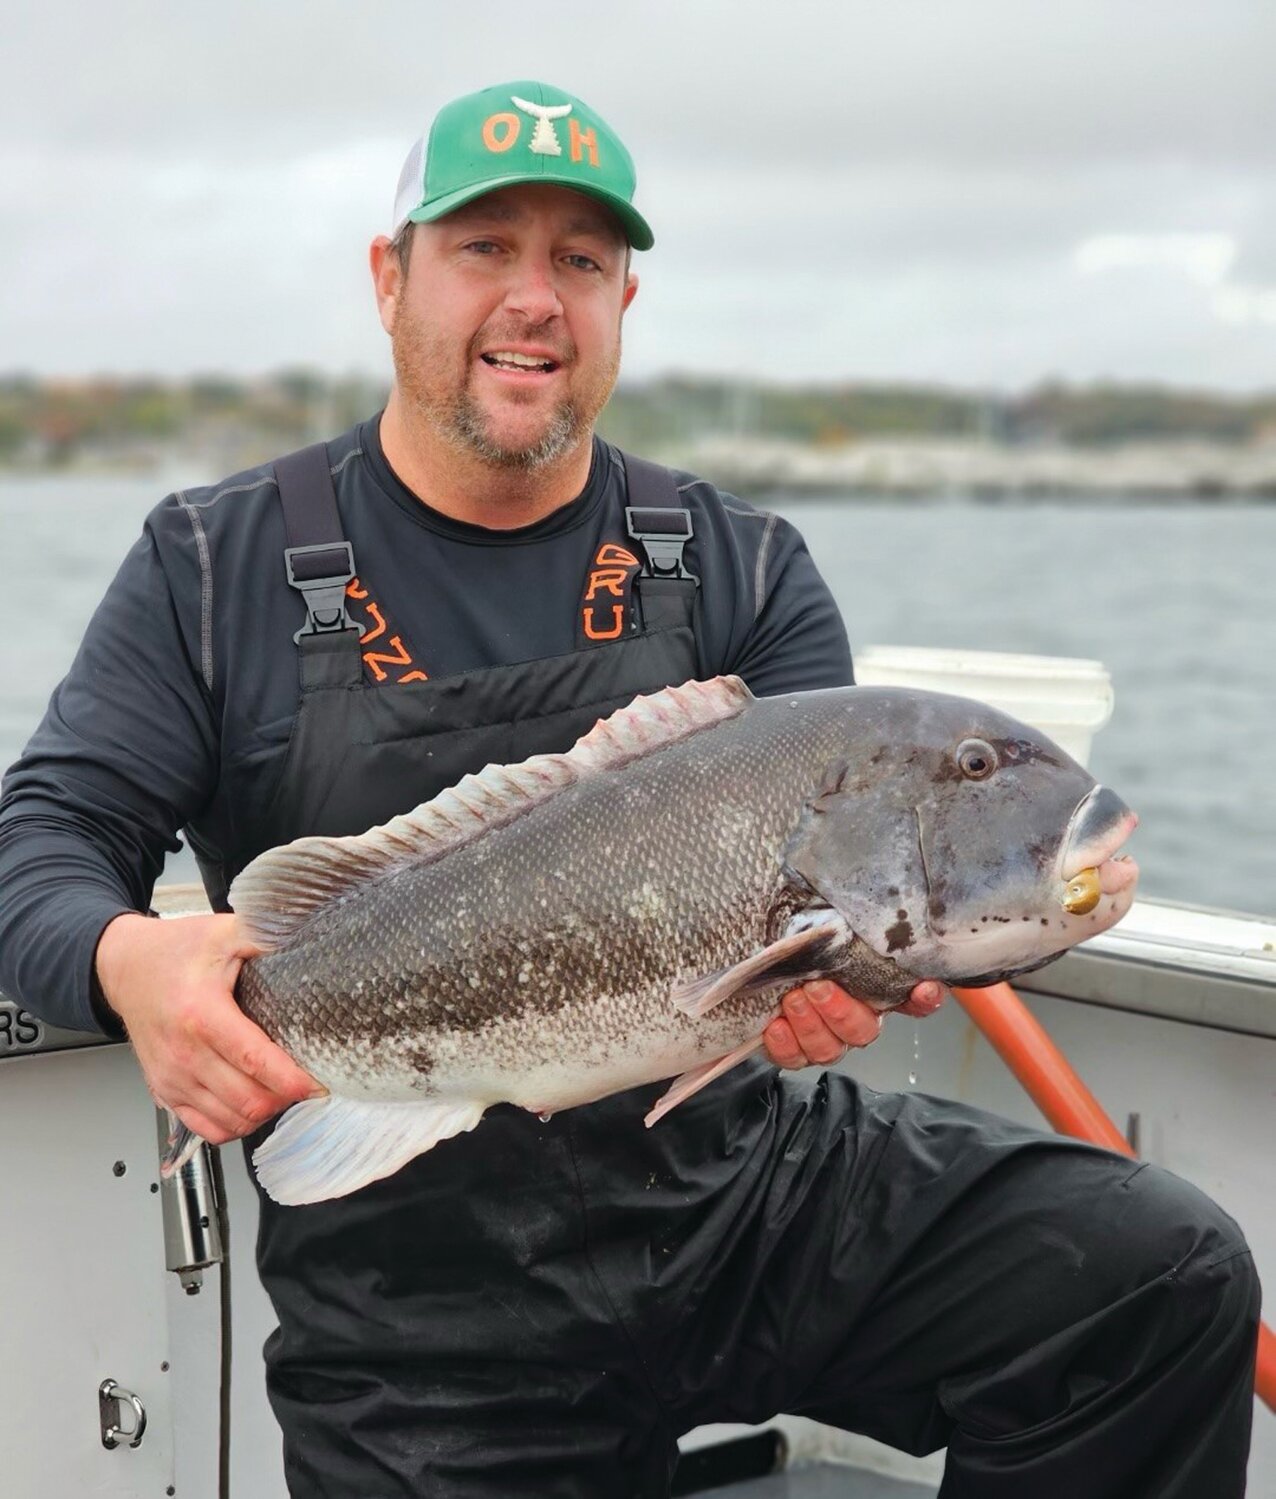 TAUTOG BITE: Chris “Higgie” Higgins with the 13.56-pound tautog he caught this week off Newport with Capt. Mike Littlefield of ArchAngel Charters. (Submitted photo)